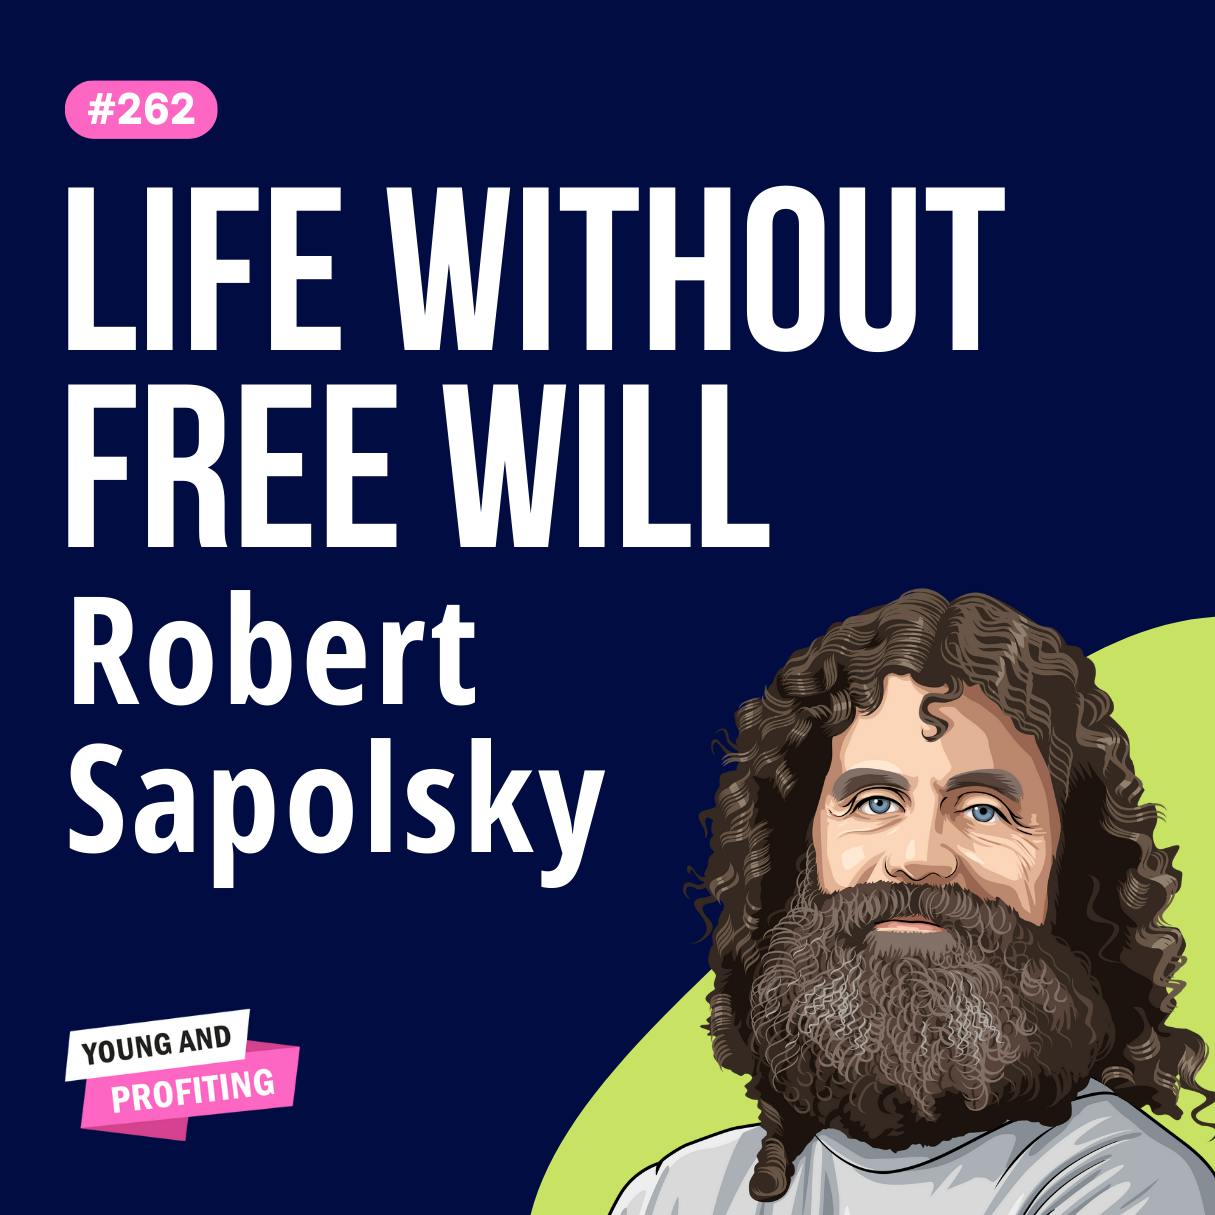 Robert Sapolsky: Free Will Doesn’t Exist! Leading Neuroscientist Claims ALL Behavior Is Biologically Determined | E262 by Hala Taha | YAP Media Network